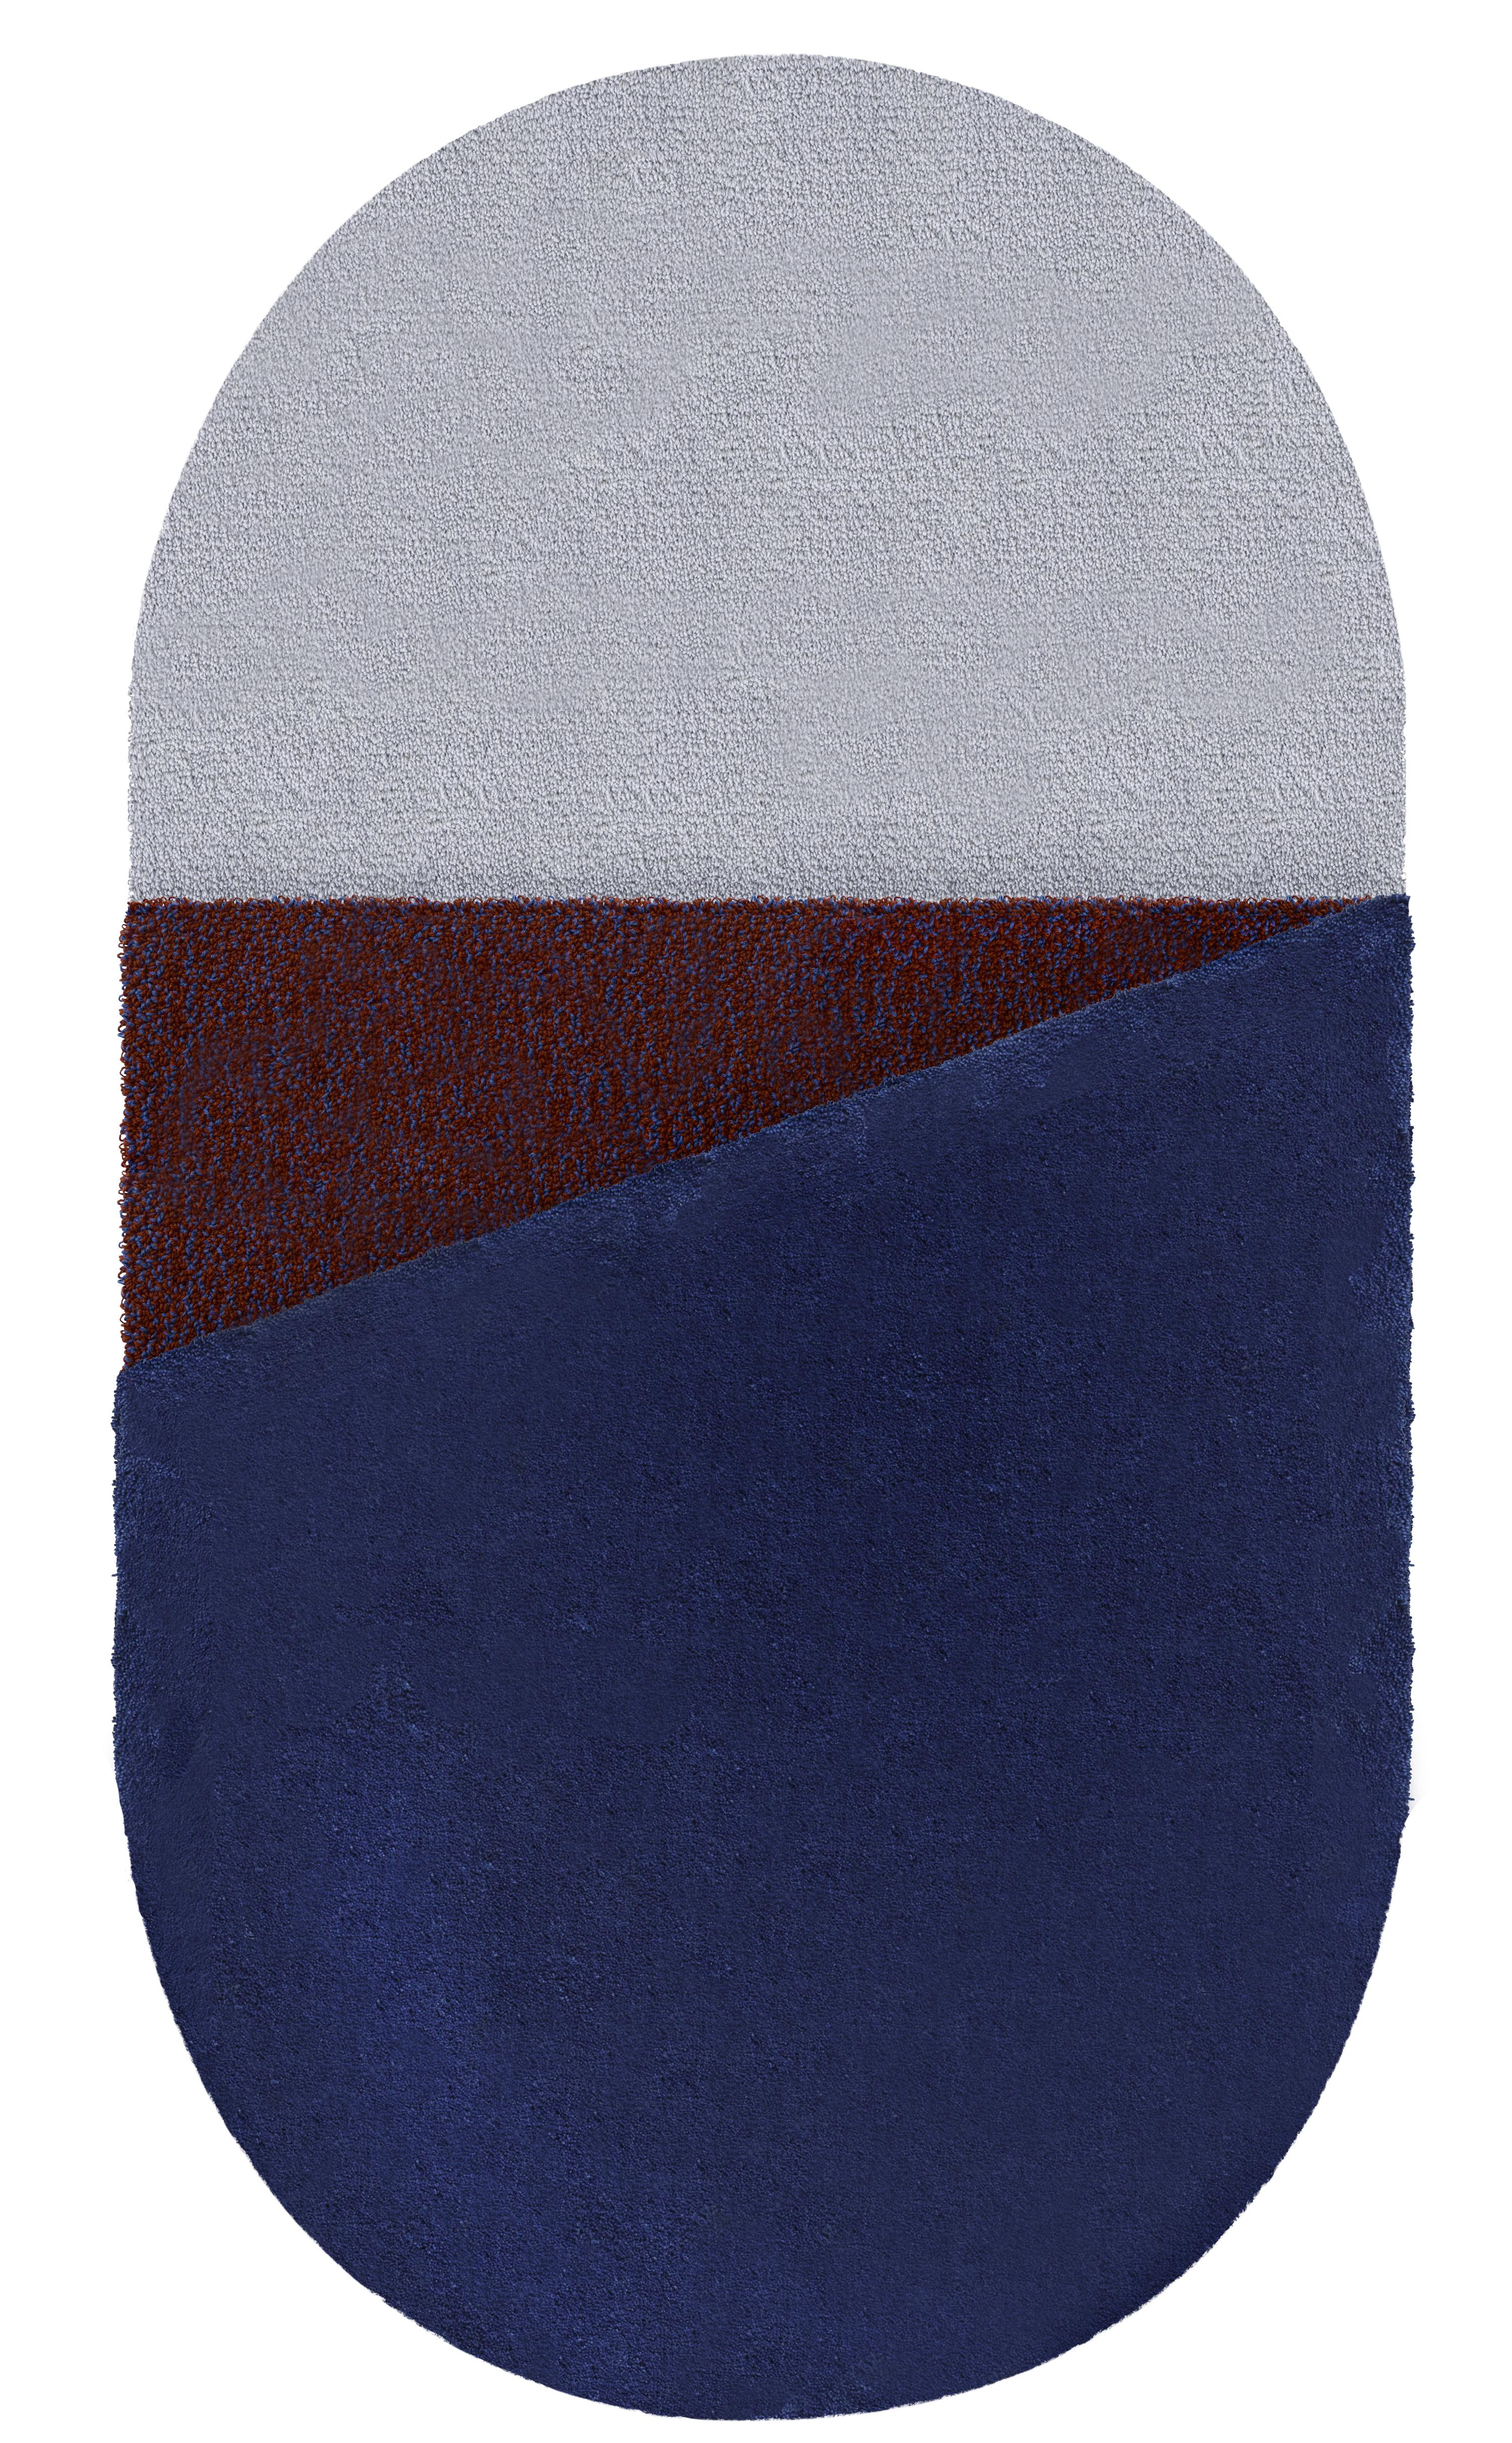 Large Blue Oci right rug by Seraina Lareida
Dimensions: W 150 x H 280 cm 
Materials: 100% New Zeland top-quality wool.
Available in sizes Small or Medium. Also available in colors: Brick/Pink, Yellow/Gray, Brick/Pink, Bordeaux/Ecru and,